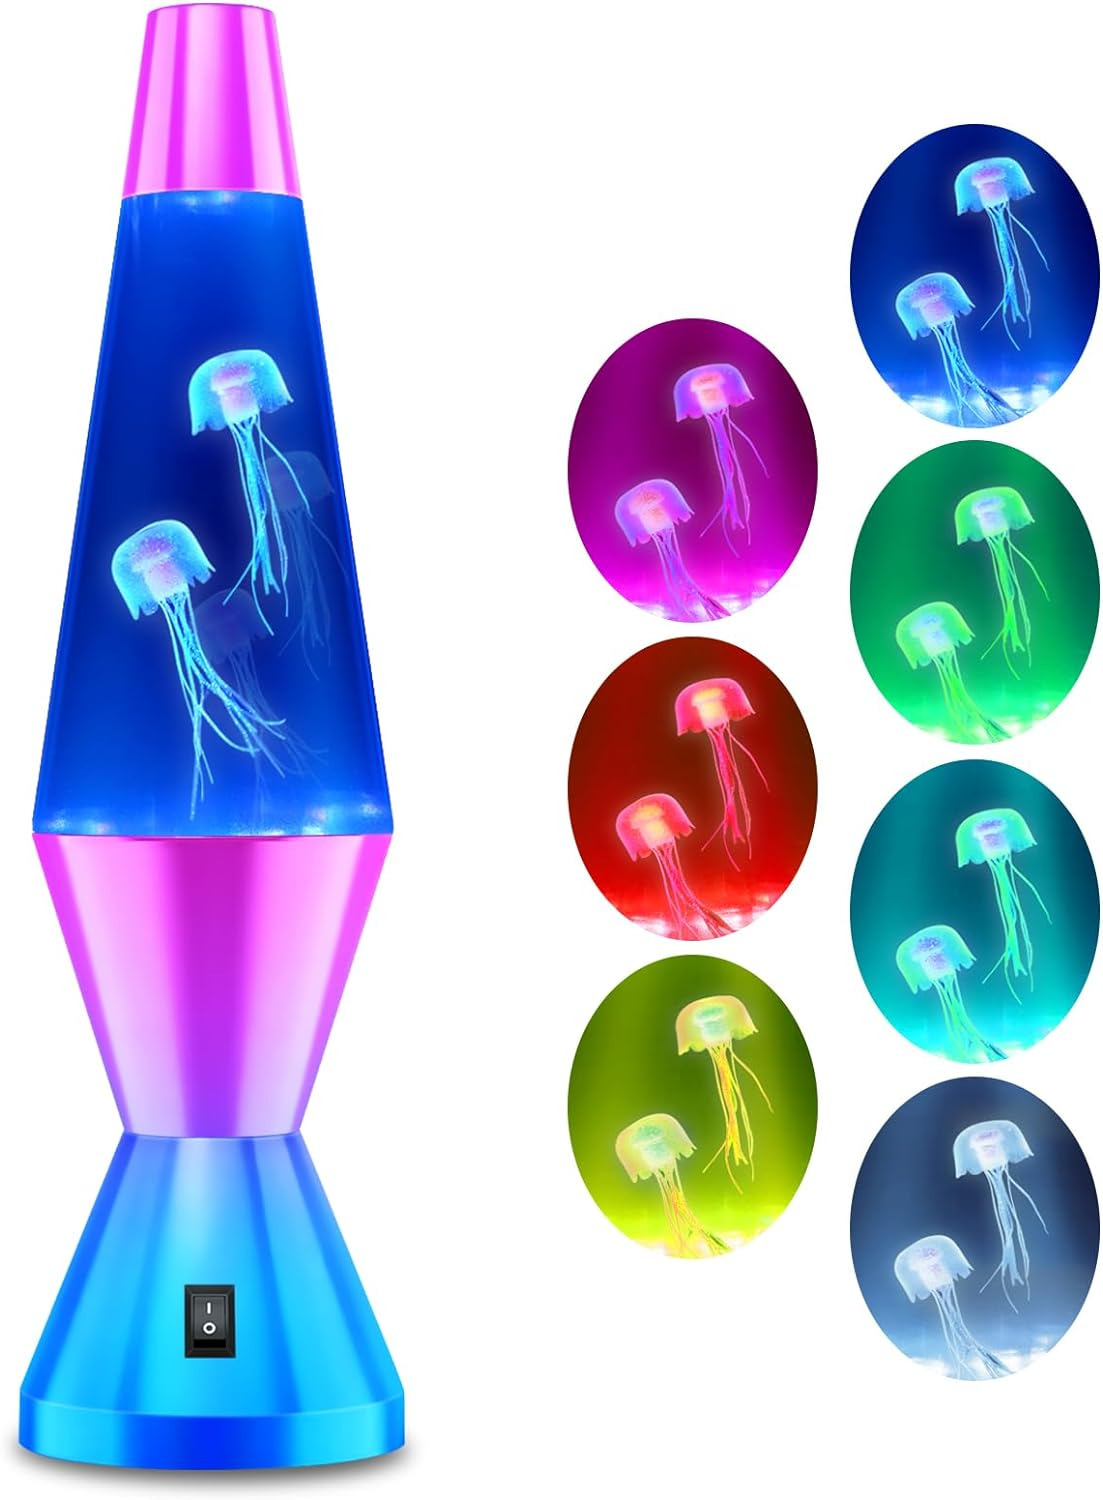 Gifts for Girls Women Mom, Jellyfish Tank Table Lamp with Color Changing Lights,